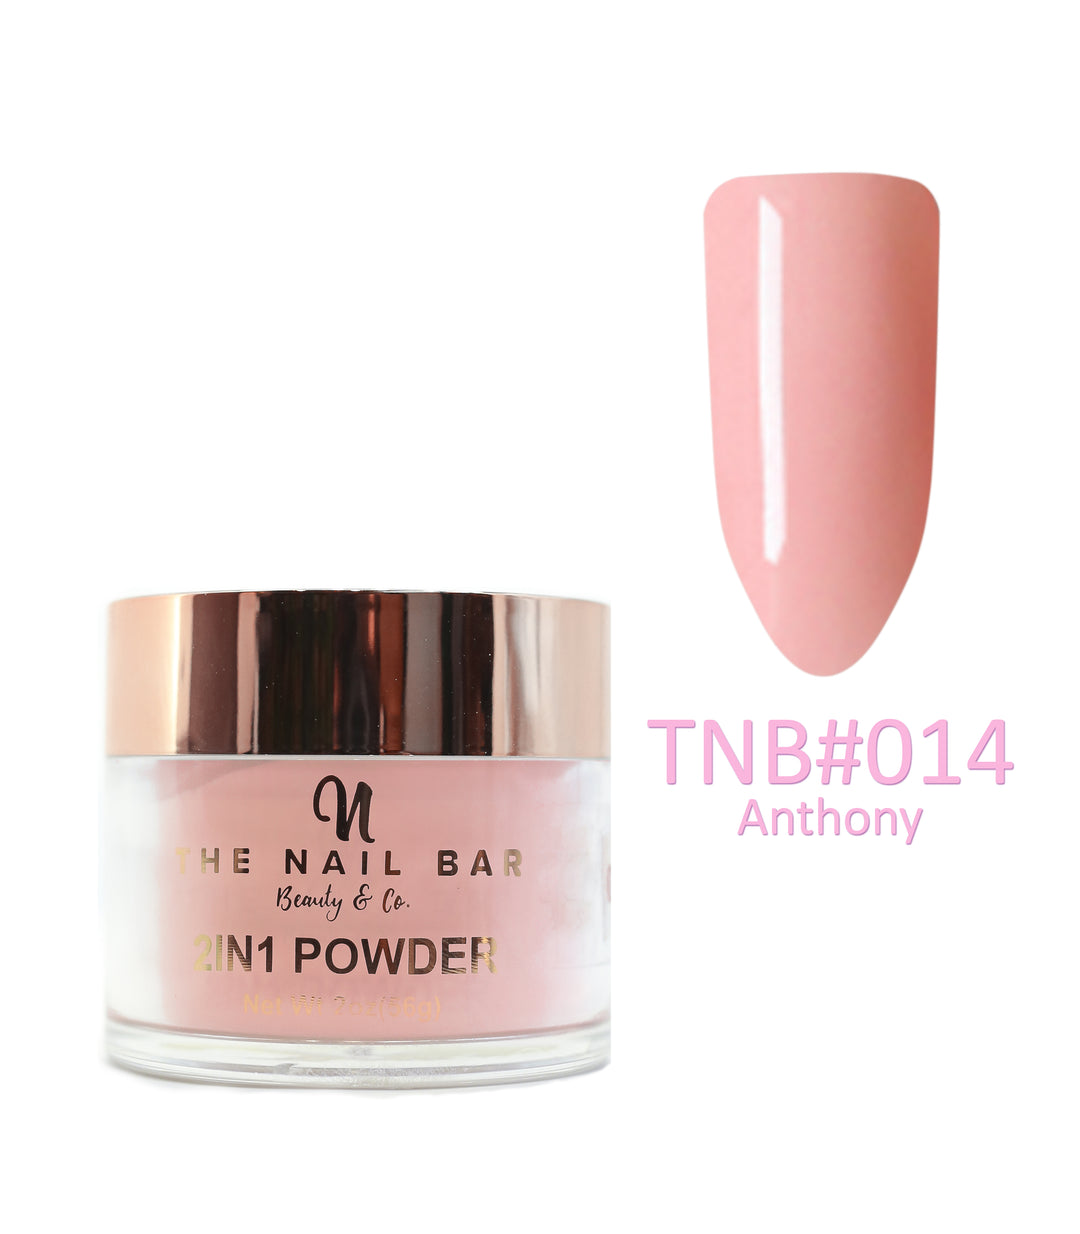 2-In-1 Dipping/Acrylic colour powder (2oz) -Anthony - The Nail Bar Beauty & Co.